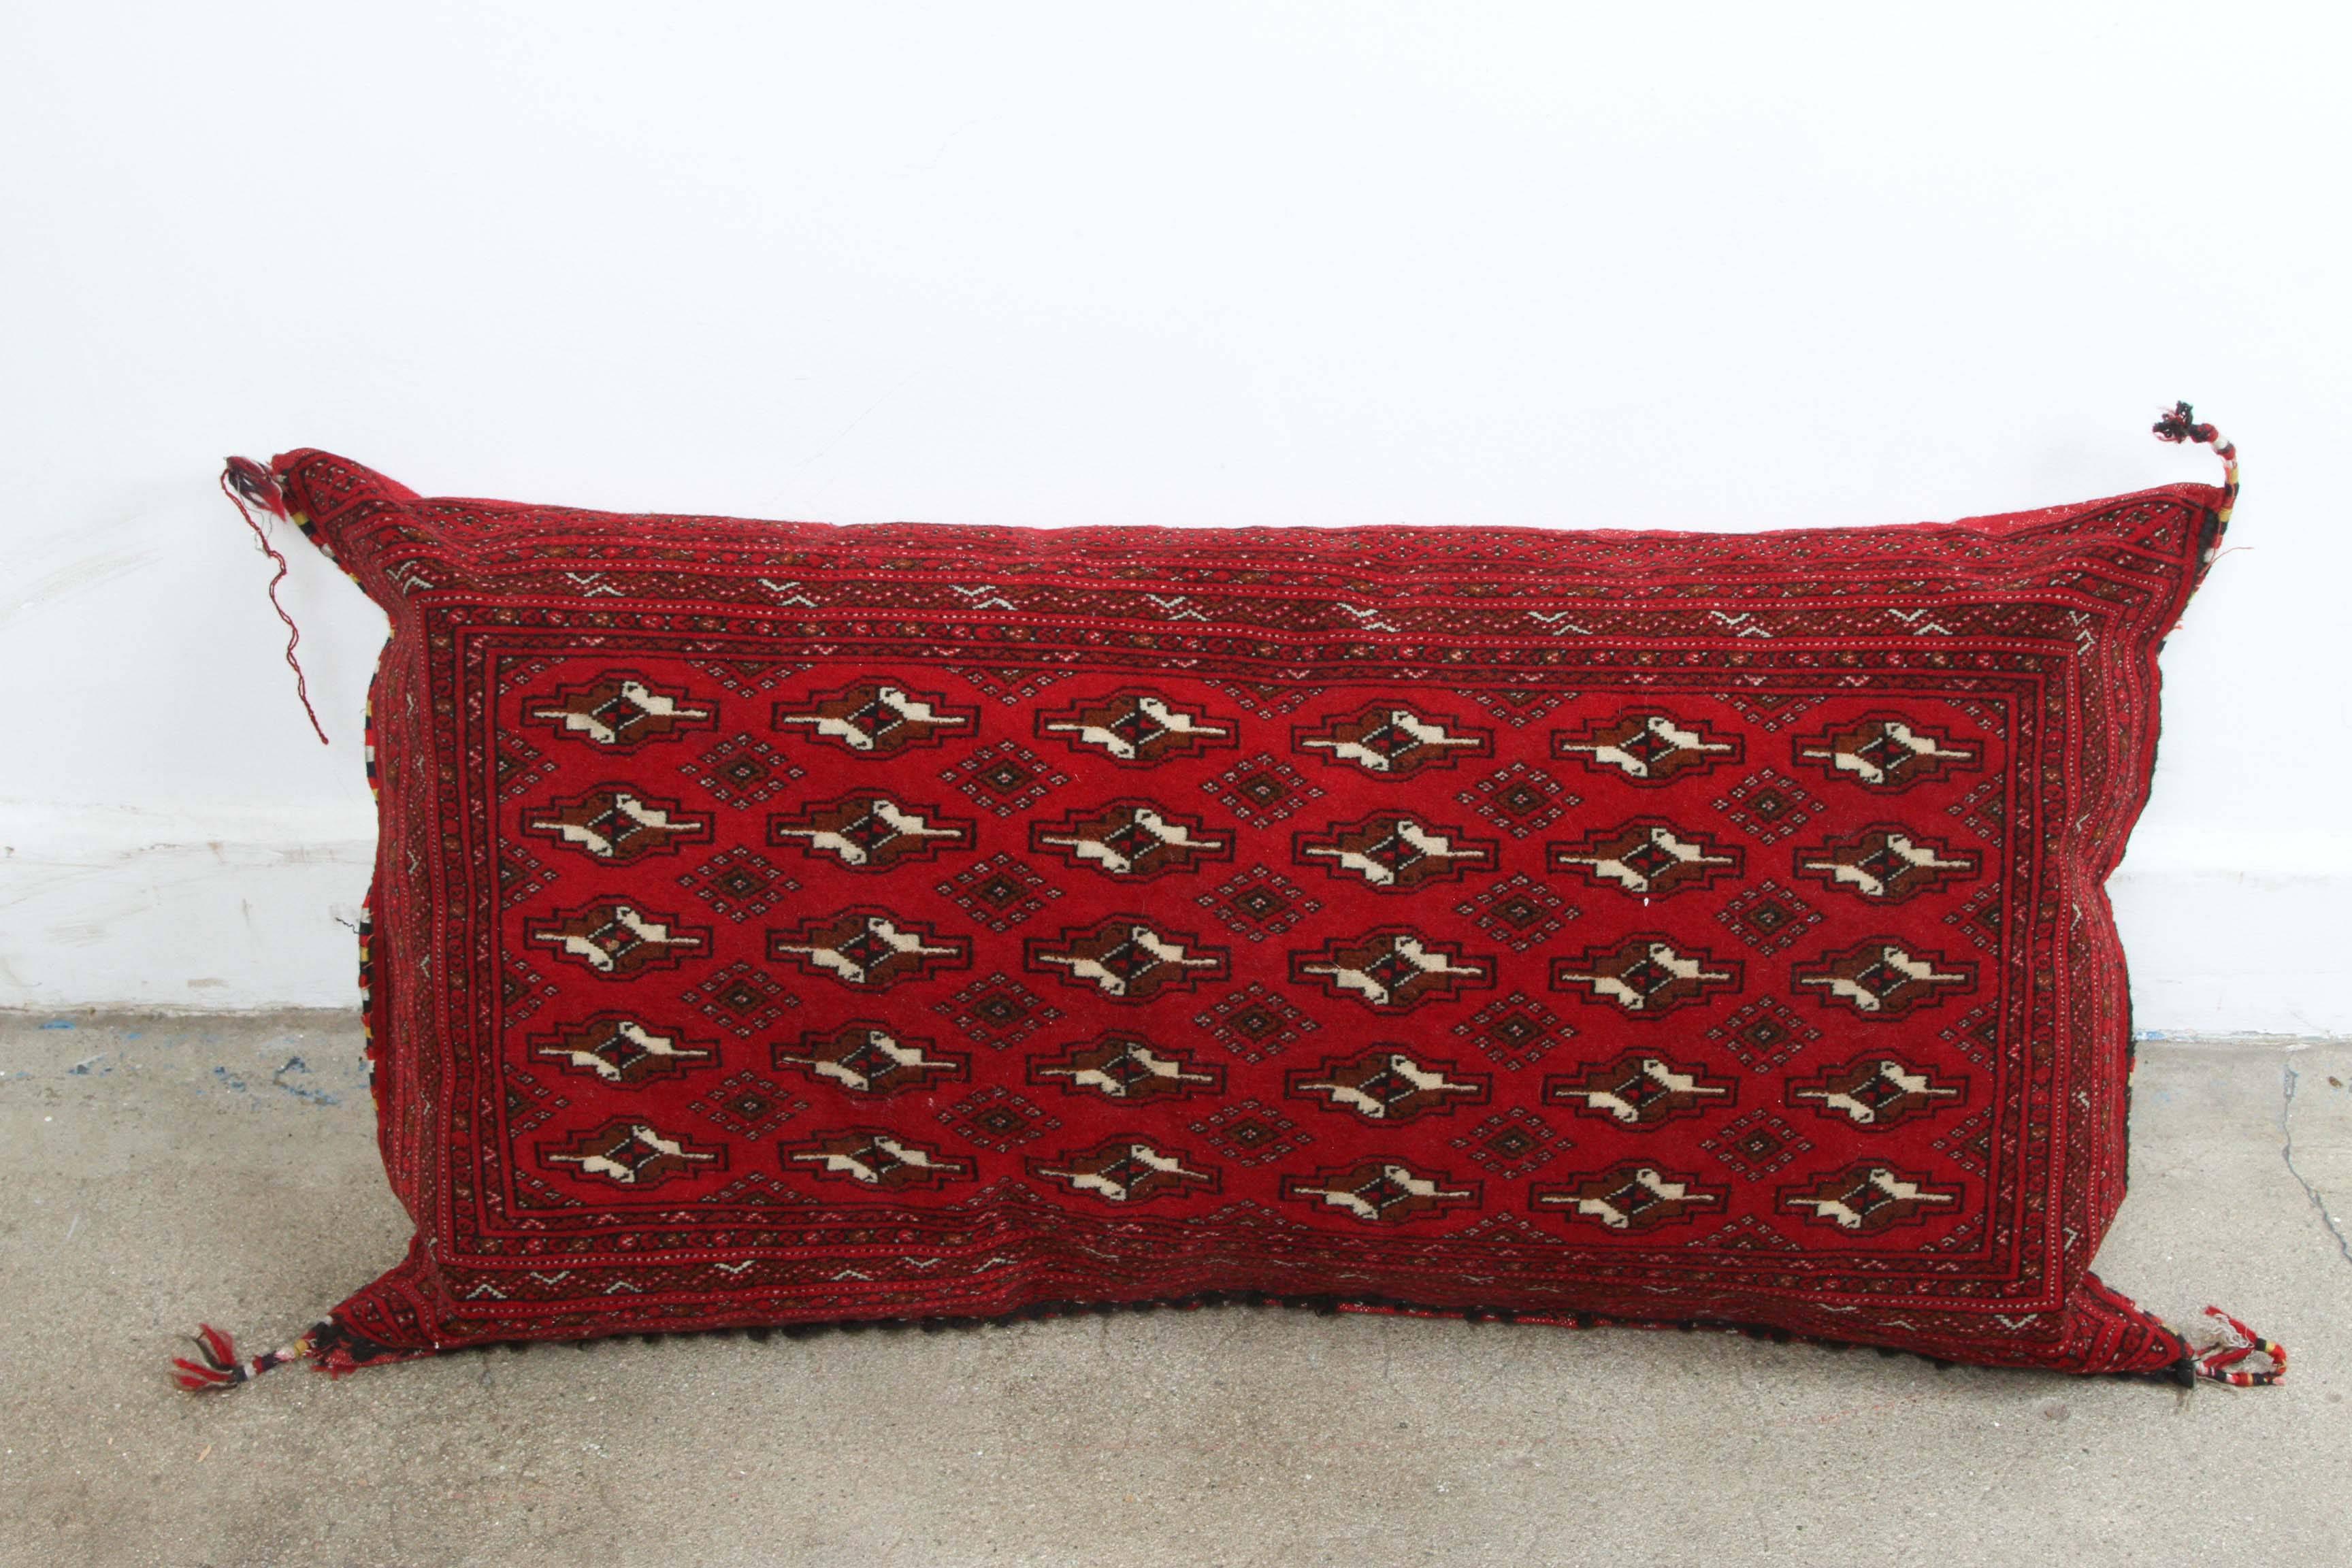 Large hand-woven Turkish red tribal pillows, made from vintage pile rug.
Pair of pillows, very similar in colors but different design and one looks faded as the other one.
Deep Moroccan red burgundy with black and white Moorish geometric design.